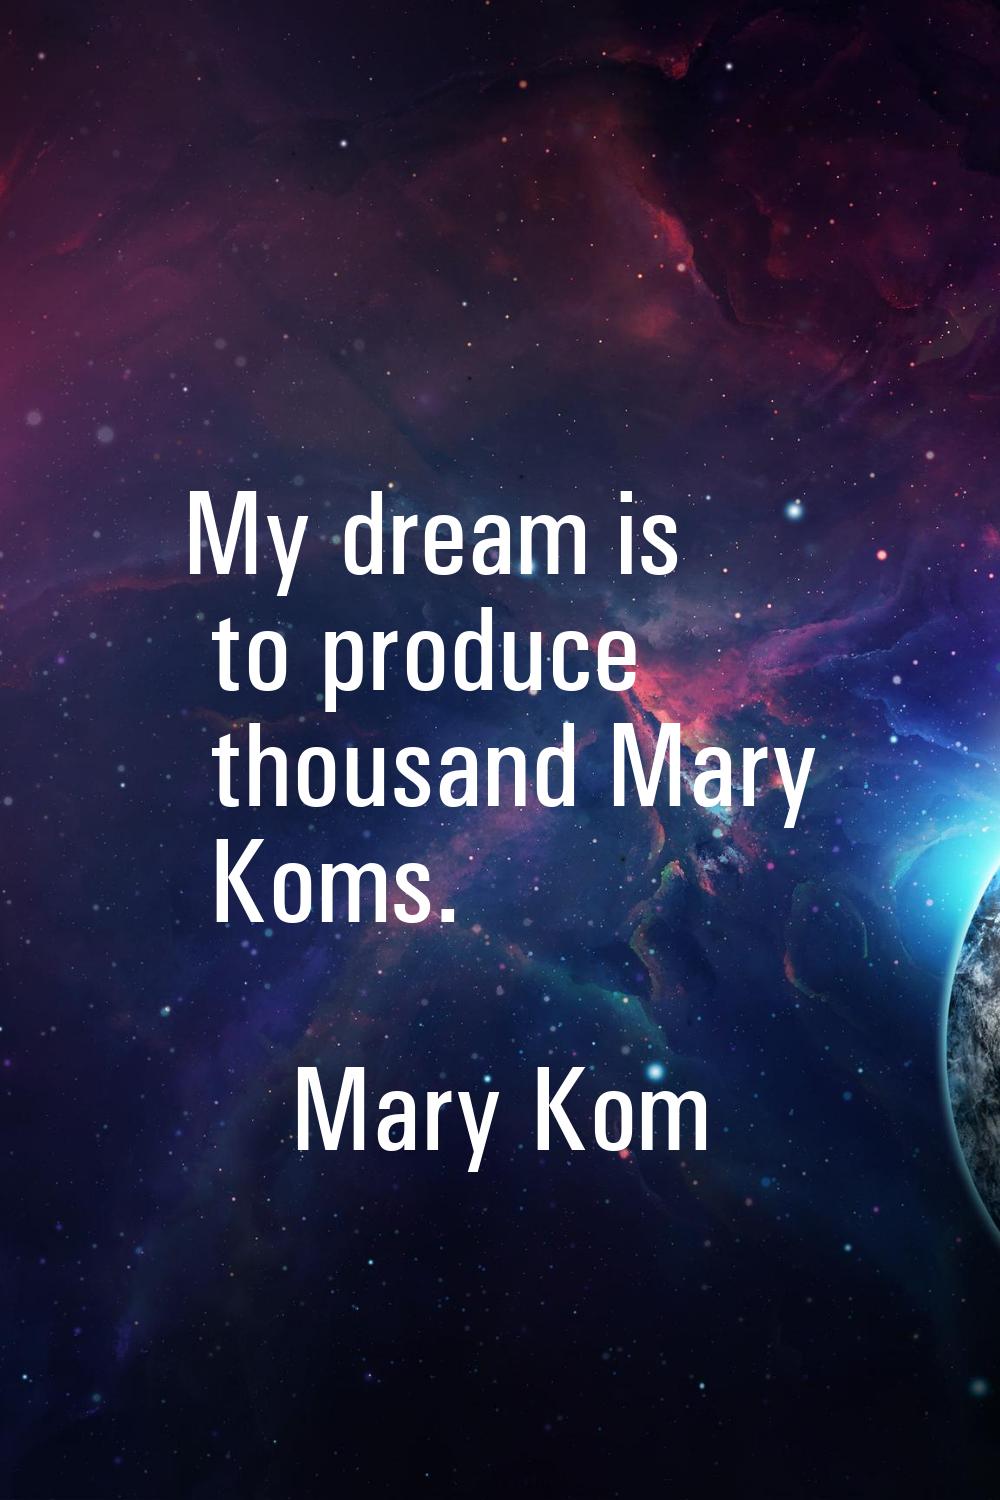 My dream is to produce thousand Mary Koms.